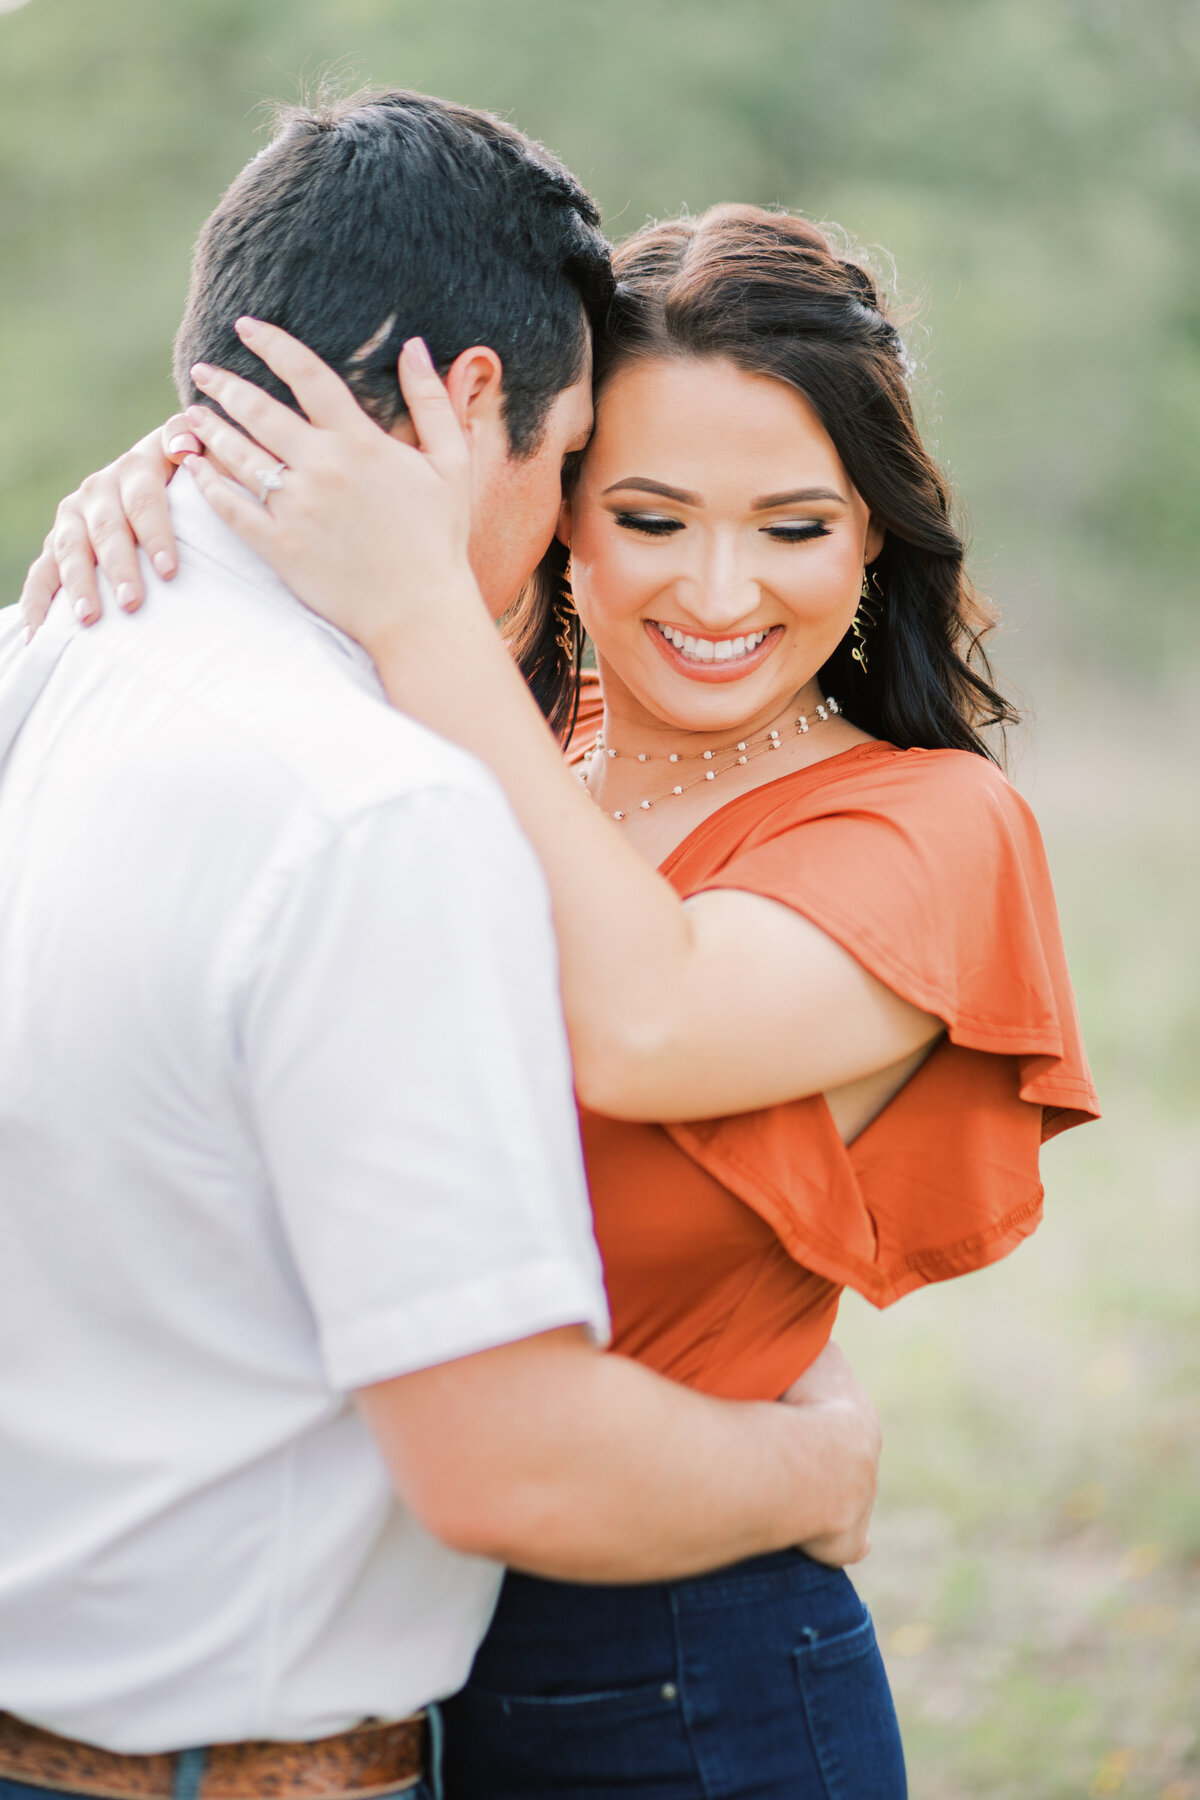 Portfolio |  Engagement Session | Wedding Photography by Ink & Willow Associates | Victoria TX